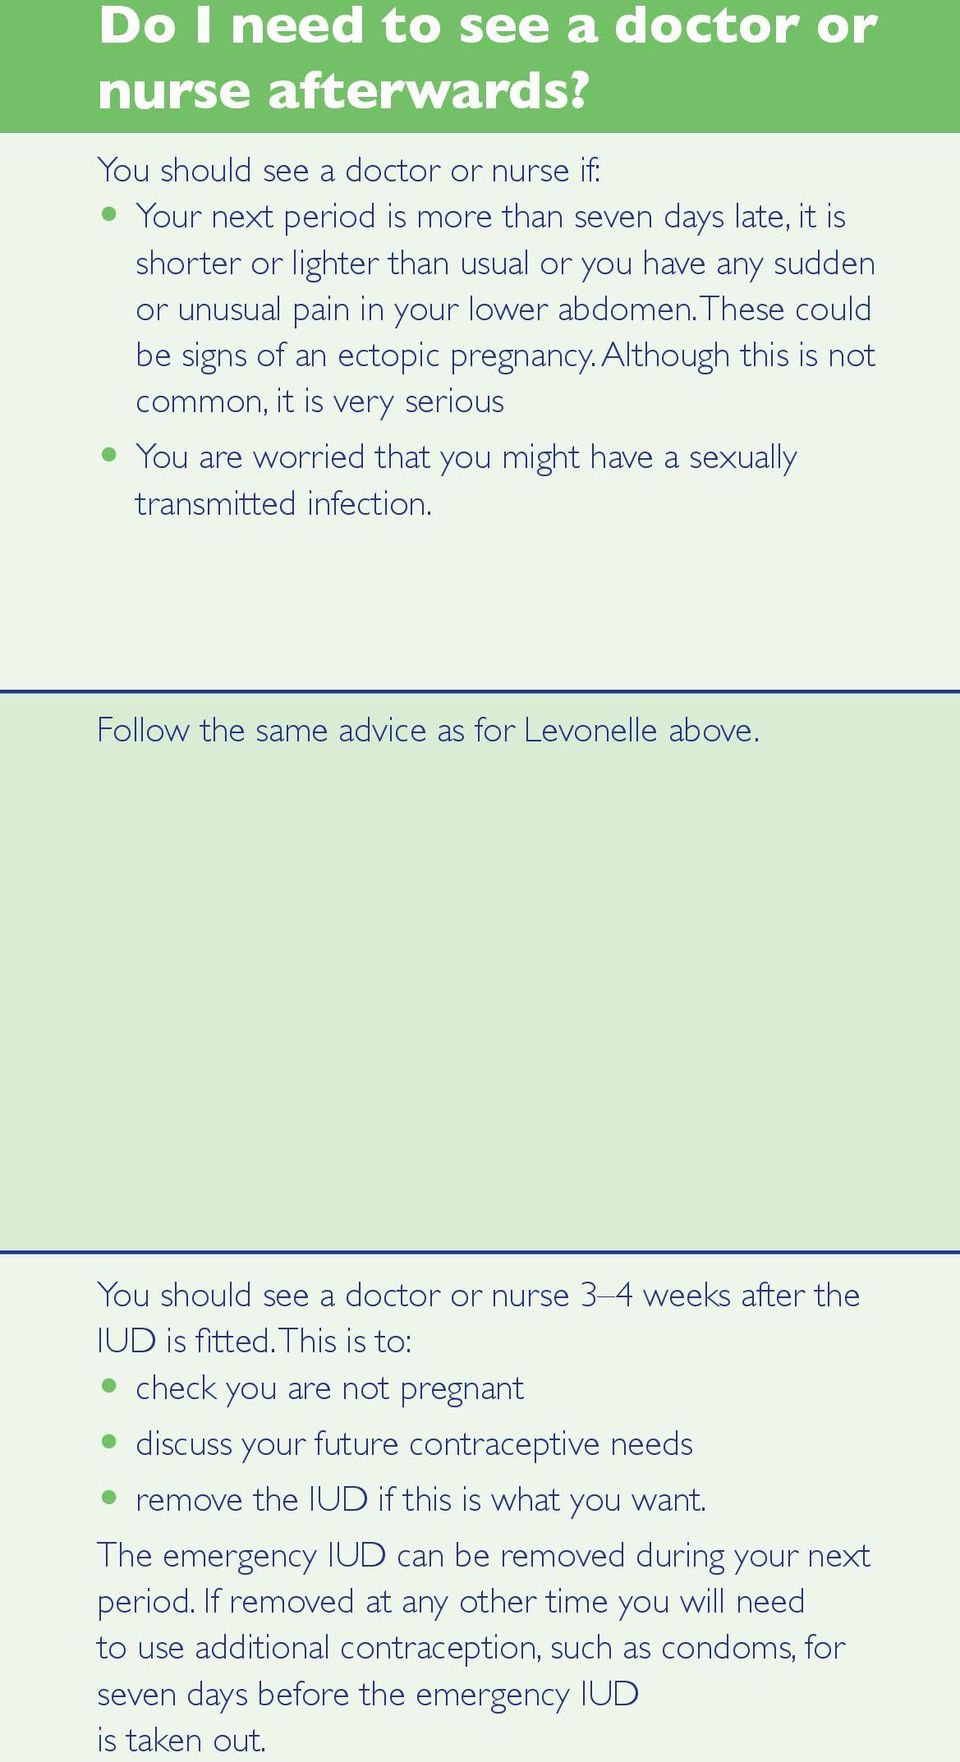 These could be signs of an ectopic pregnancy. Although this is not common, it is very serious O You are worried that you might have a sexually transmitted infection.